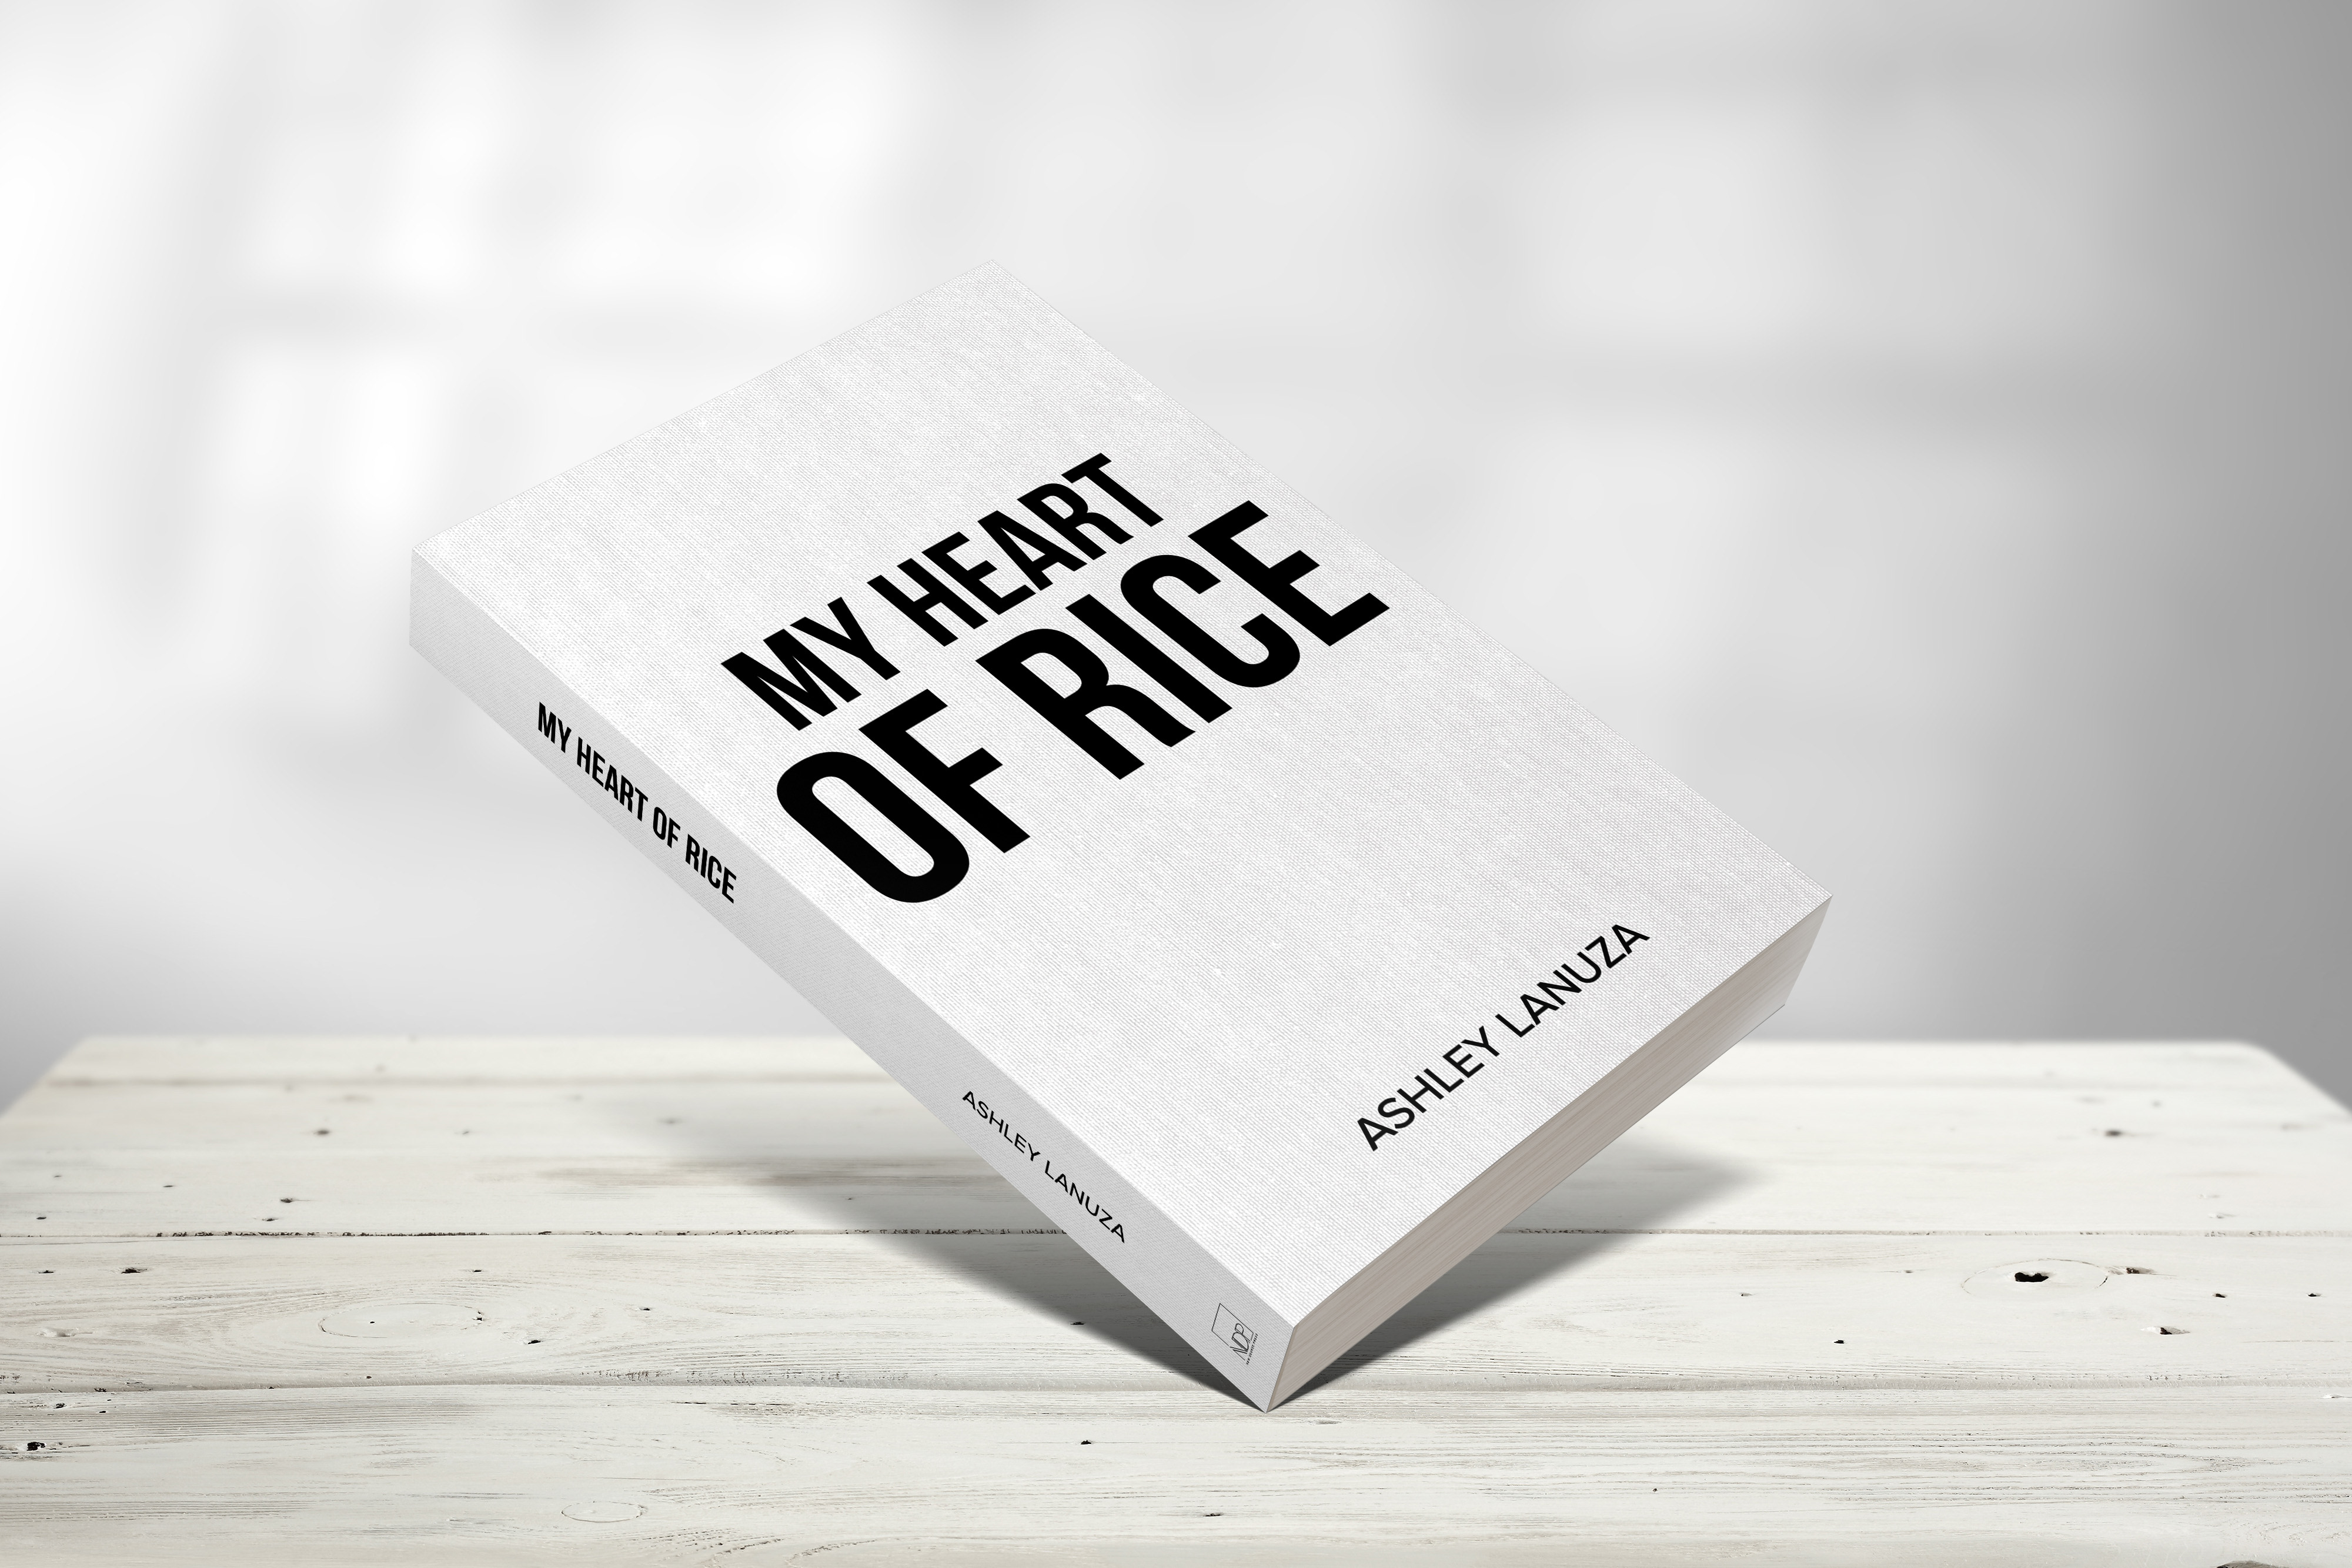 My Heart of Rice: A Poetic Filipino American Experience by Ashley